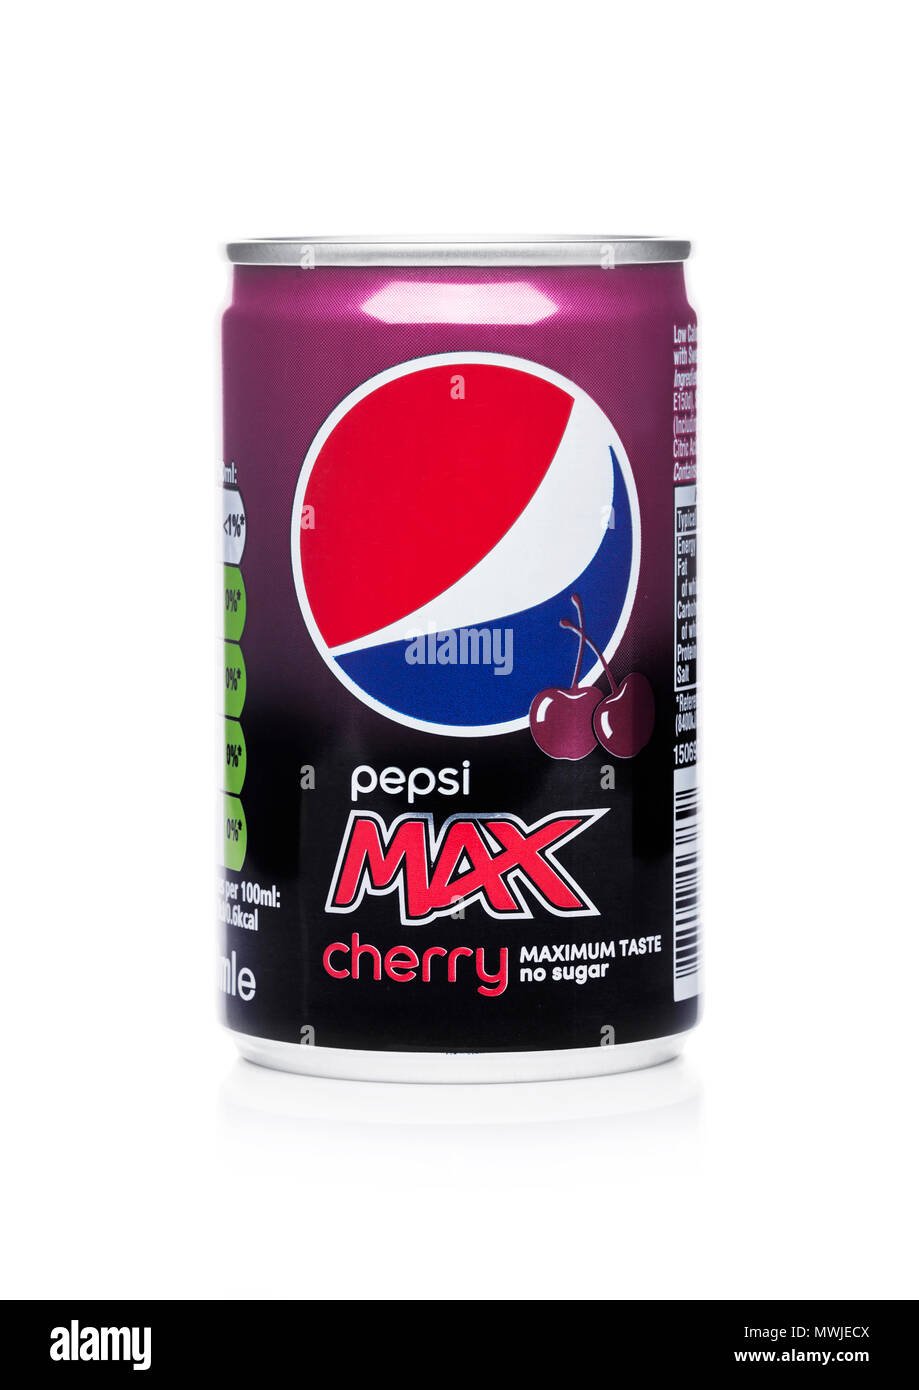 LONDON, UK - JUNE 01, 2018: Aluminium mini can of Pepsi Cola Cherry soft  drink on white background.American multinational food and beverage company  Stock Photo - Alamy